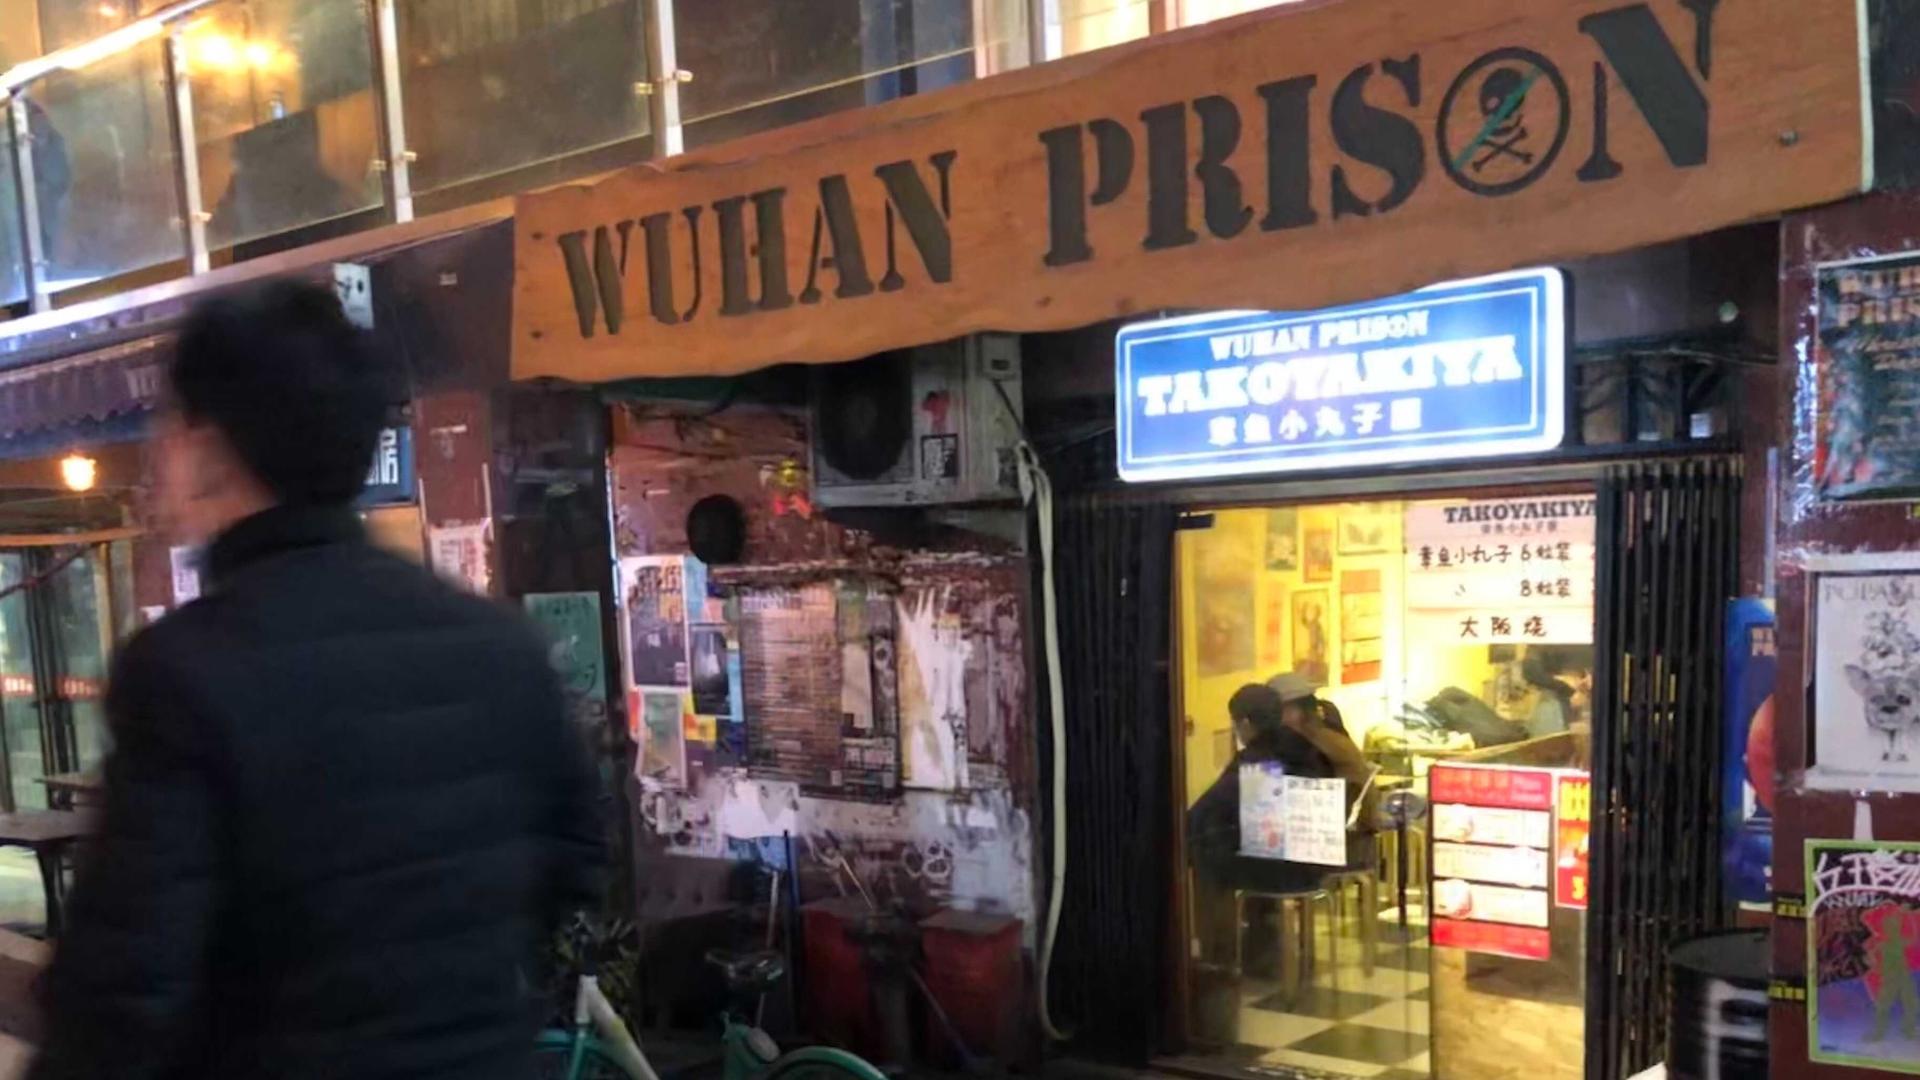 Wuhan Prison is a dive bar that holds about 200 people in Wuhan, China. 